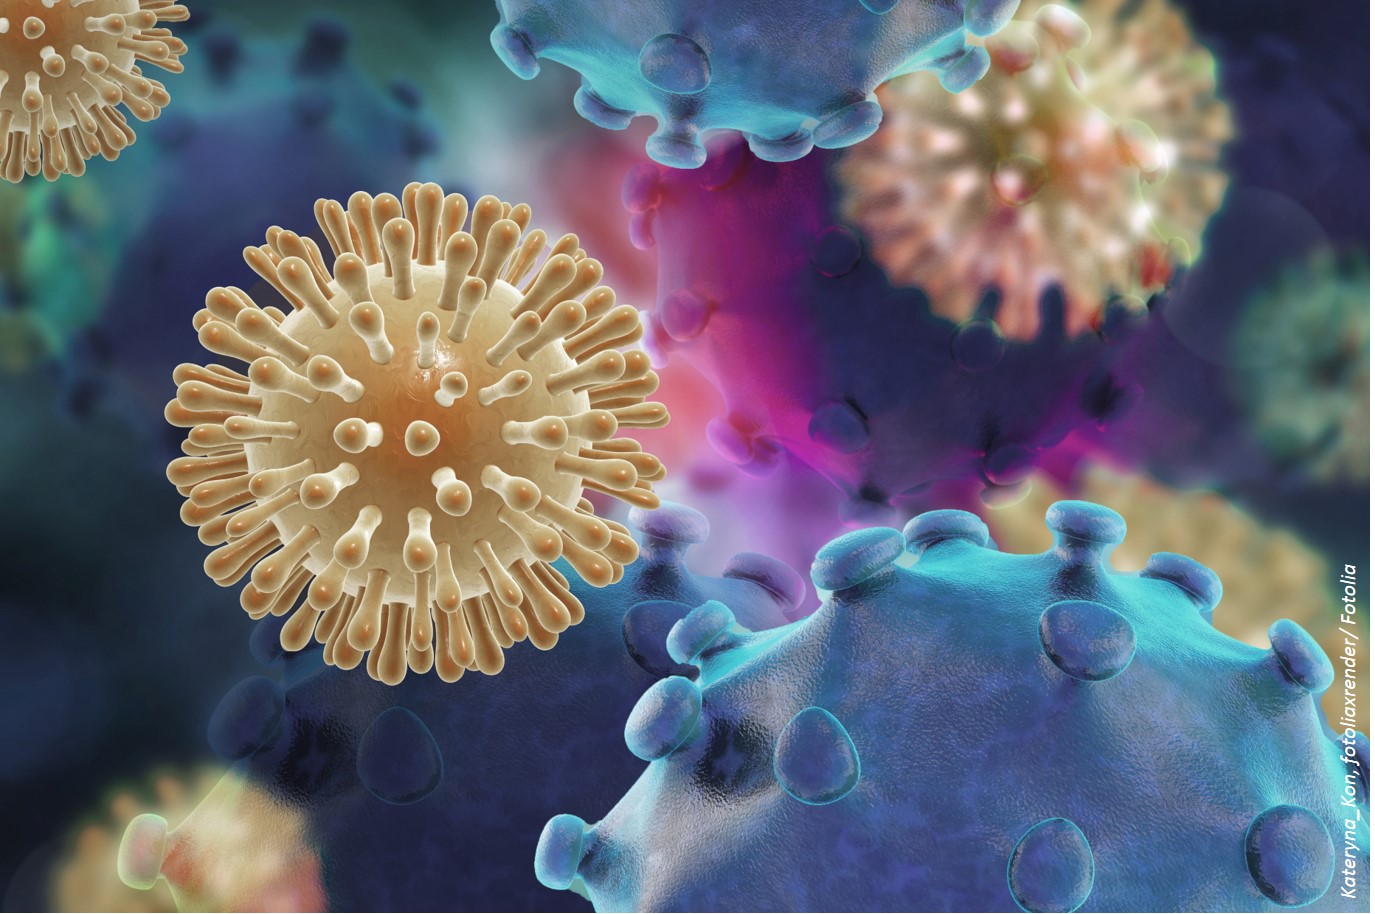 Treating HCV in HIV-Coinfection: Still a Therapeutic Dilemma?